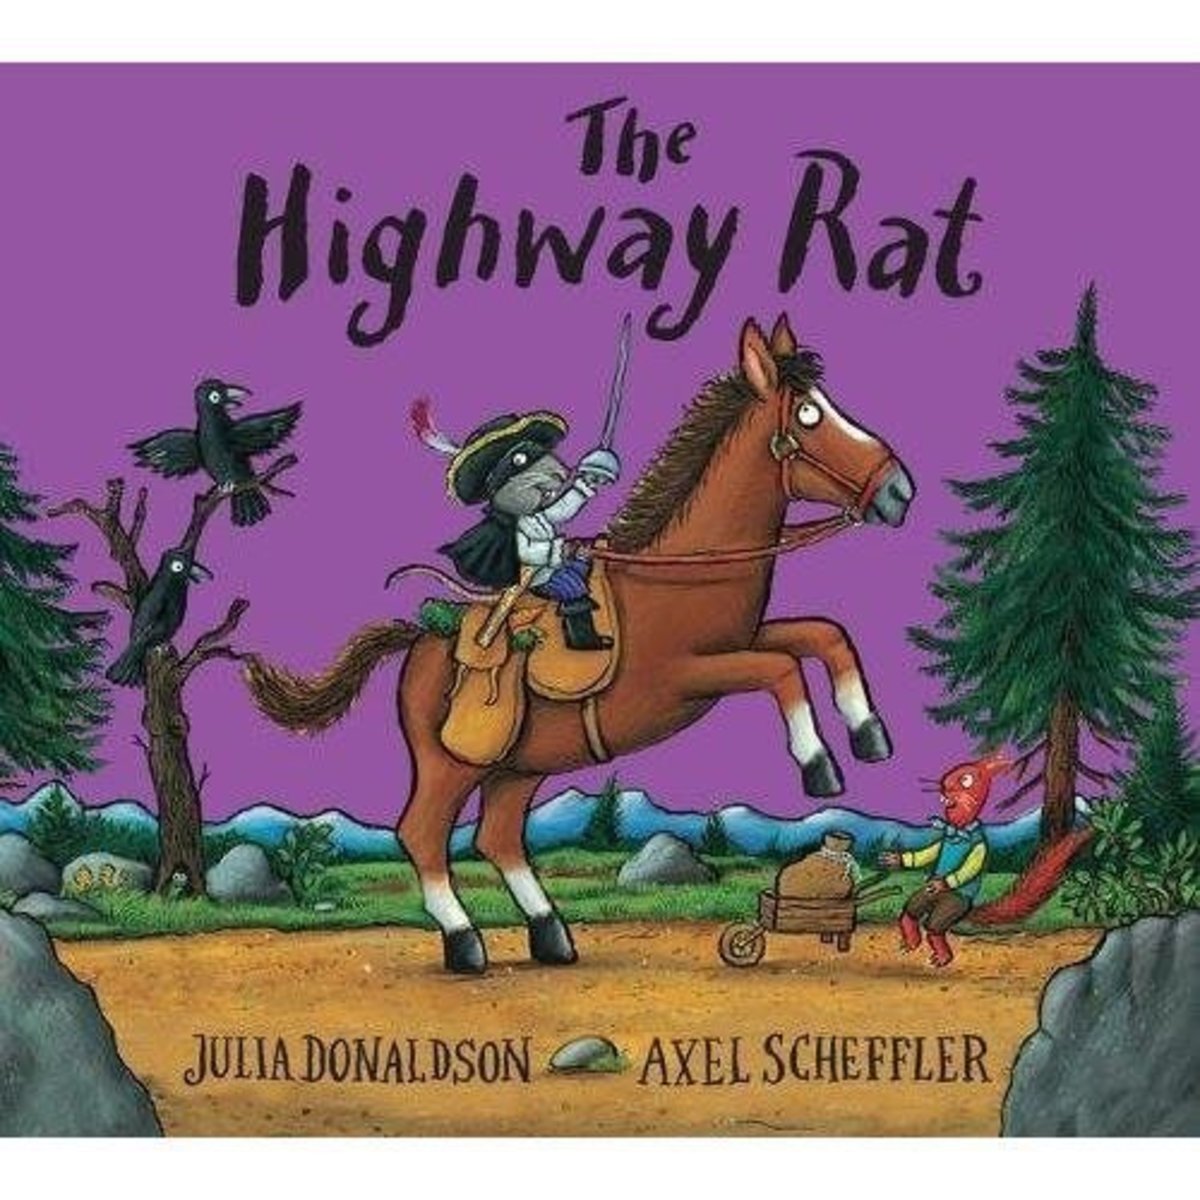 Children's Book Review: The Highway Rat by Julia Donaldson